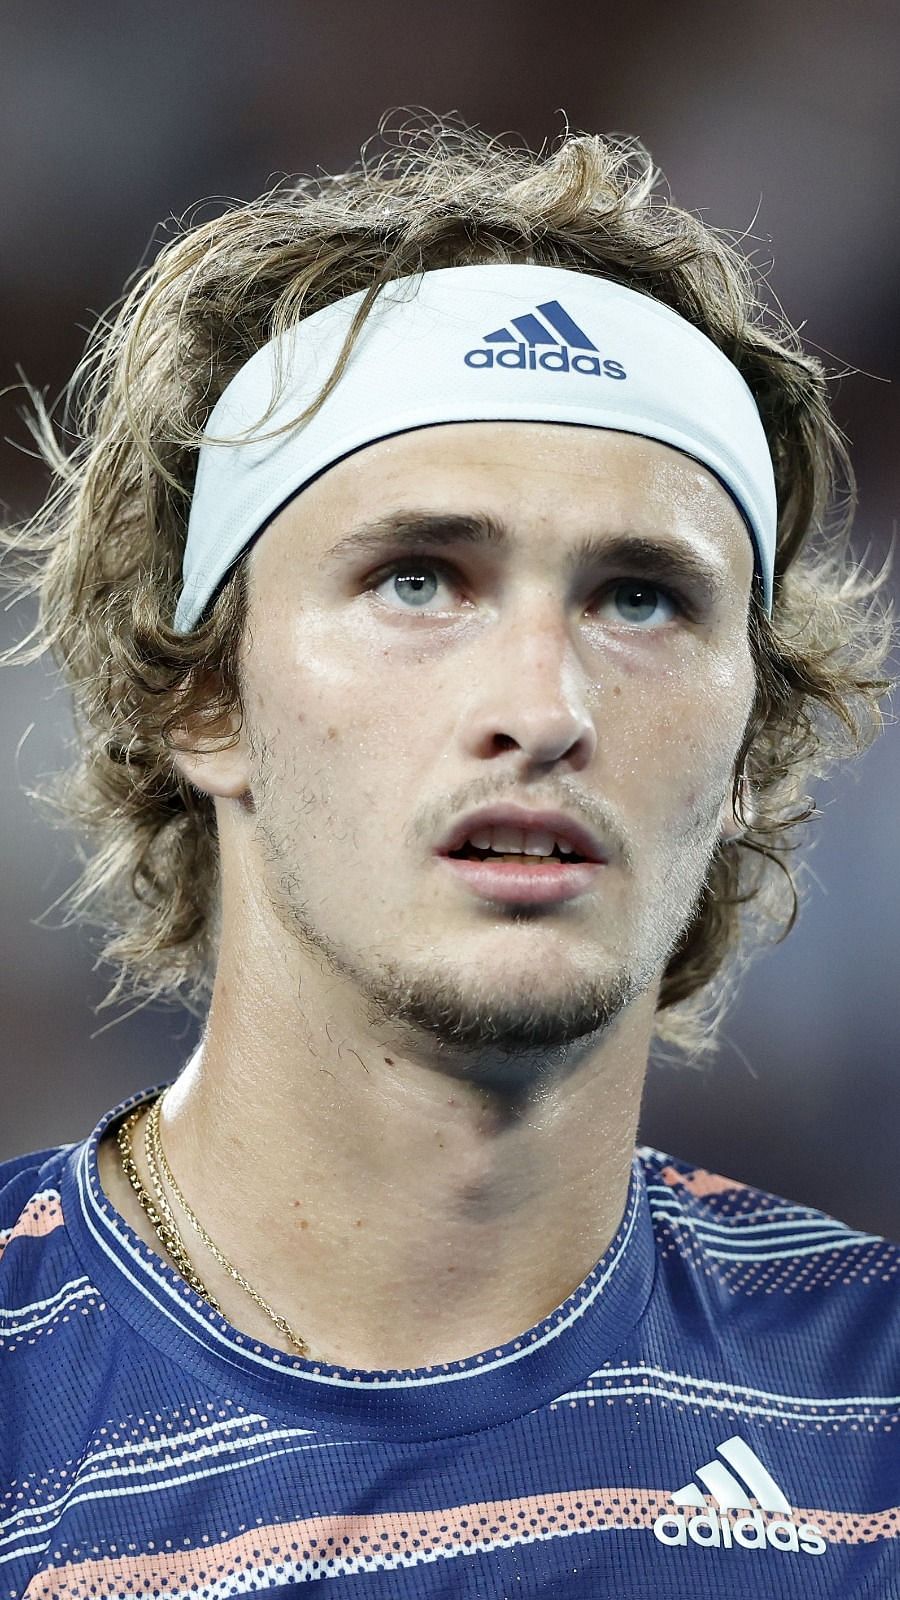 2020 Mexican Open, Acapulco, Alexander Zverev vs Jason Jung Round of 32 Where to watch, TV schedule, live stream details and more